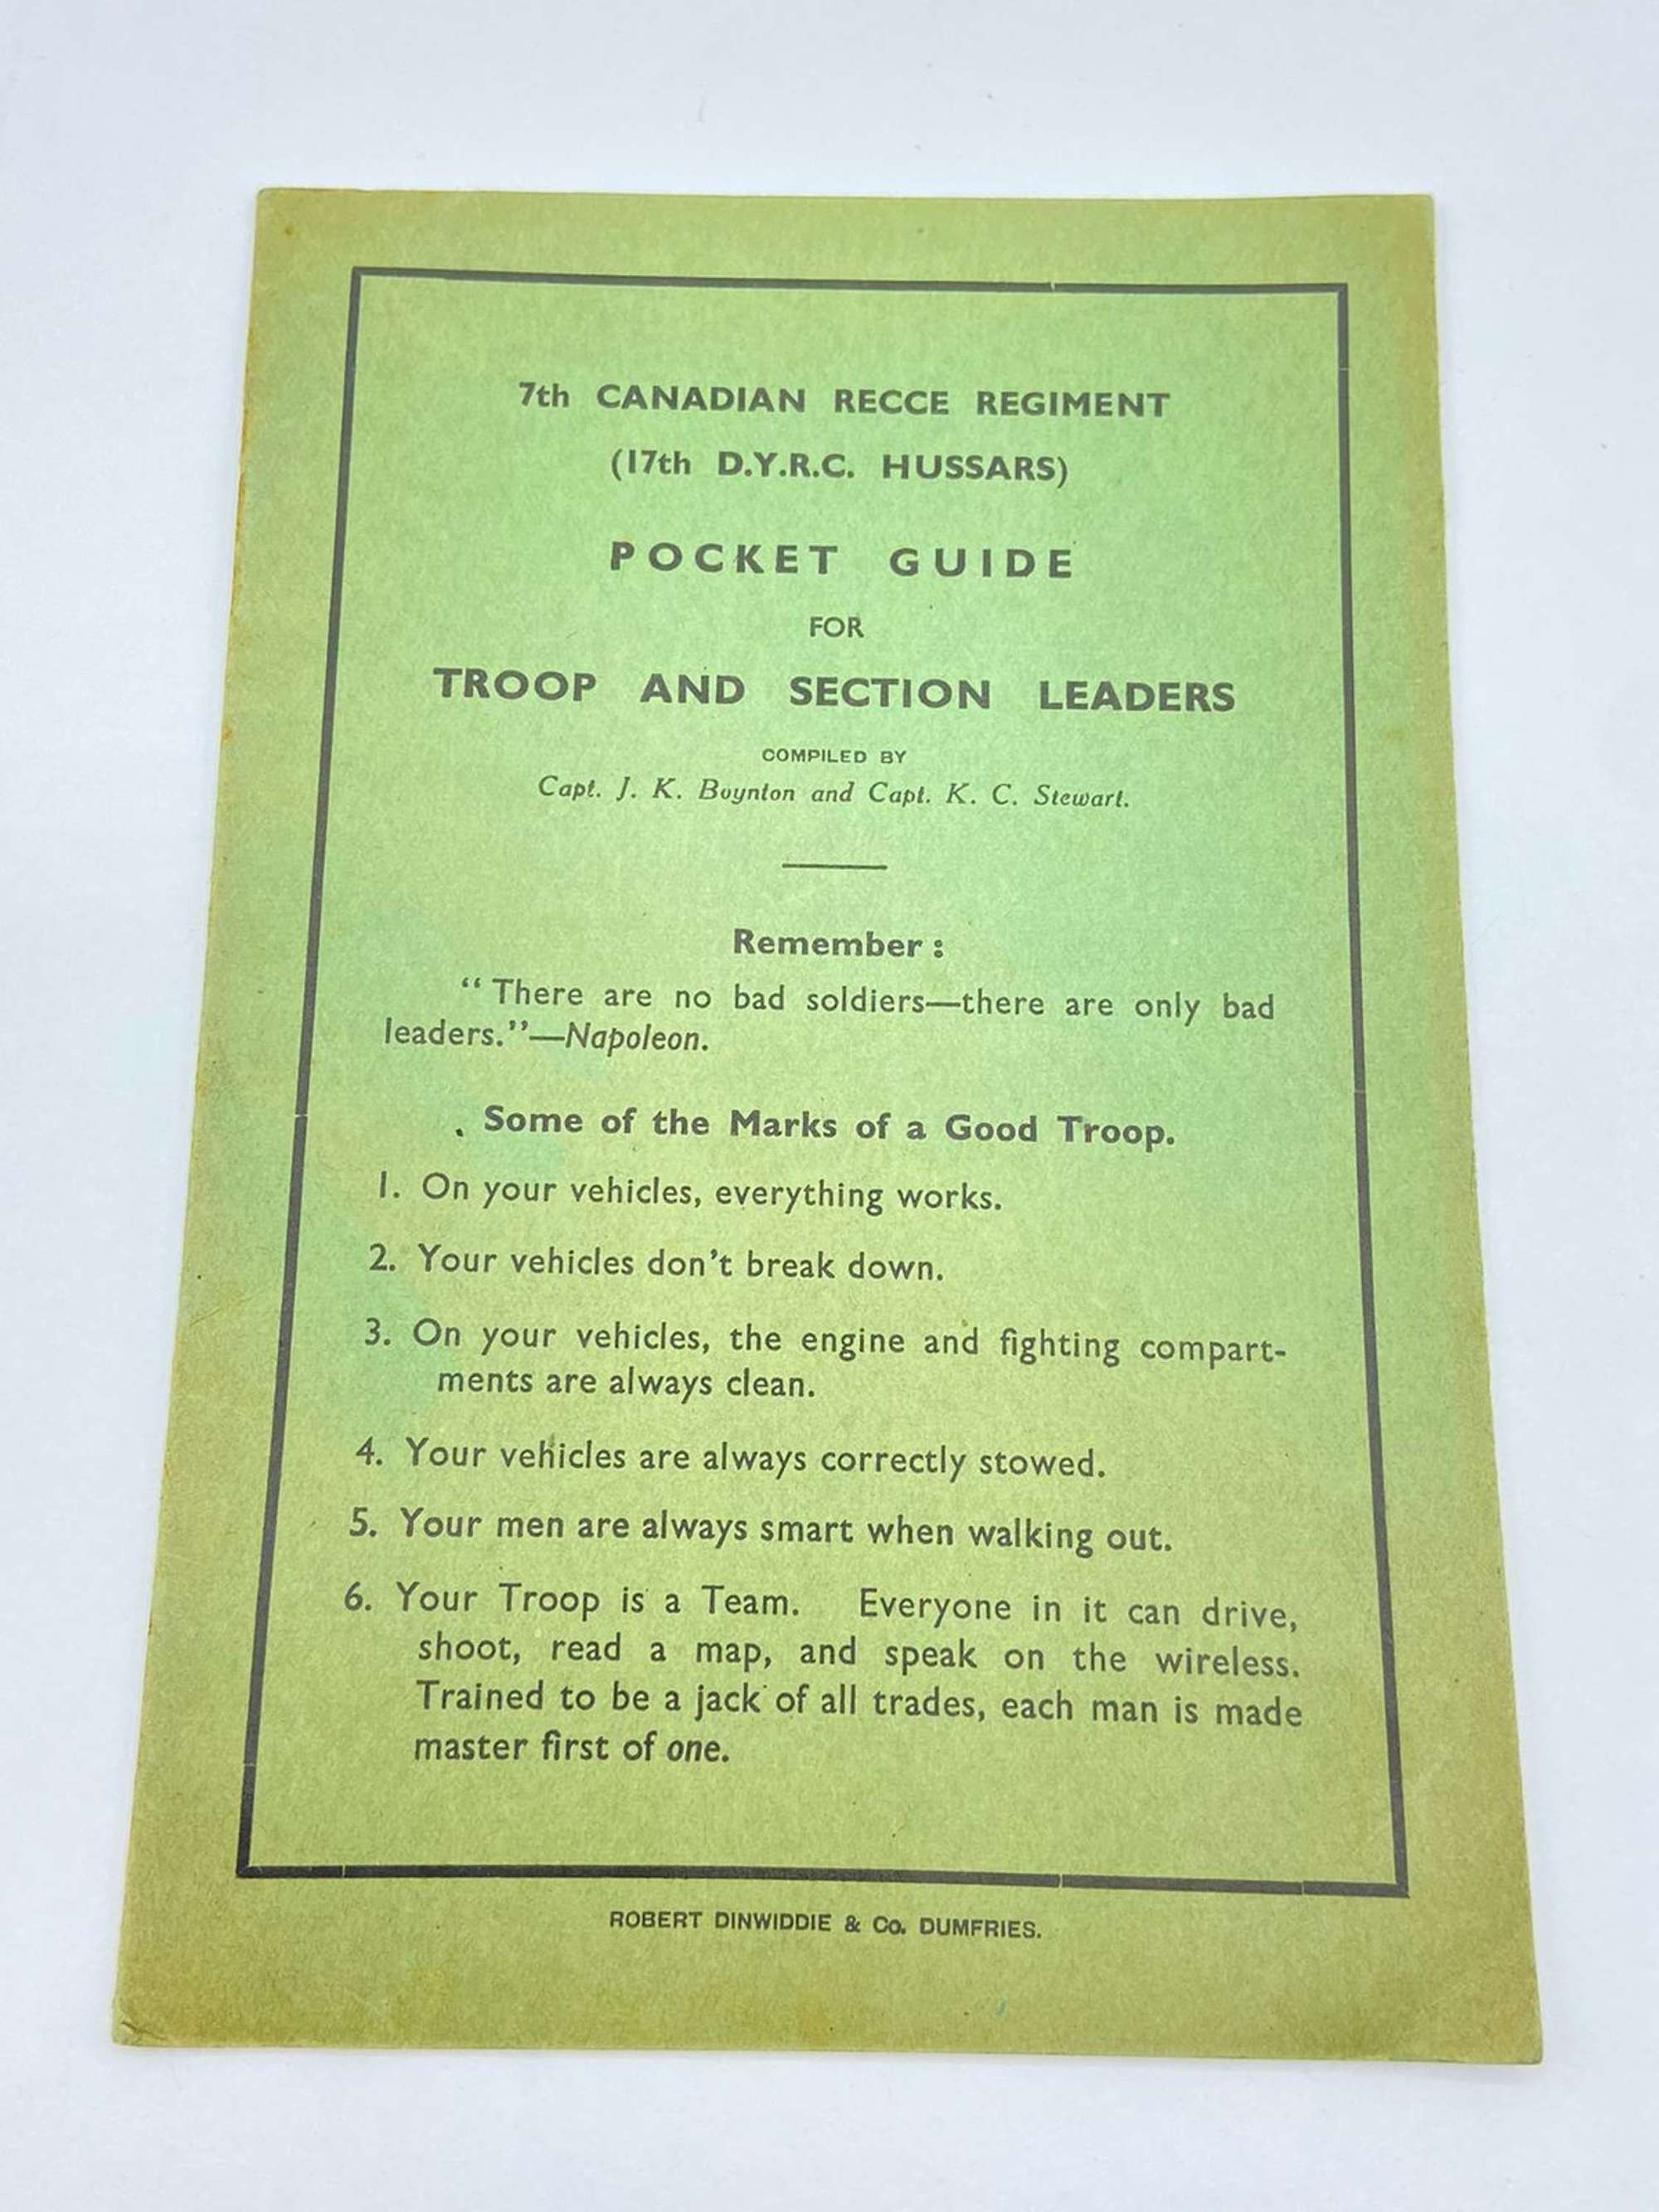 WW2 7th Canadian Recce Reg Pocket Guide For Troop & Section Leaders